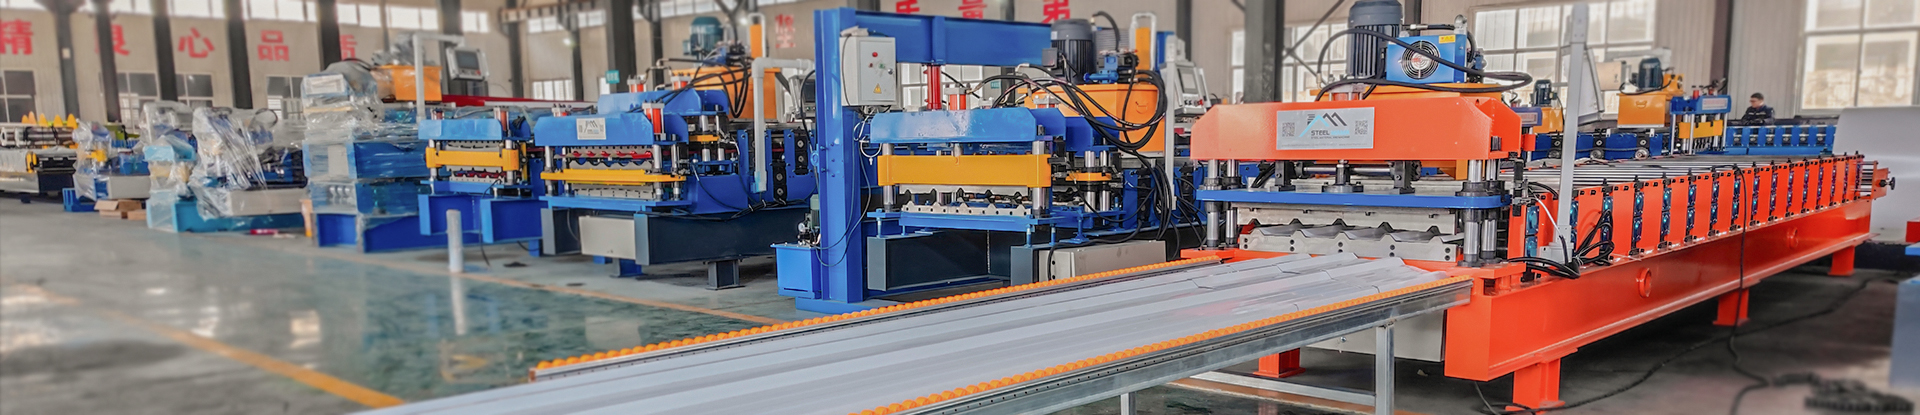 roll forming machine manufacturer